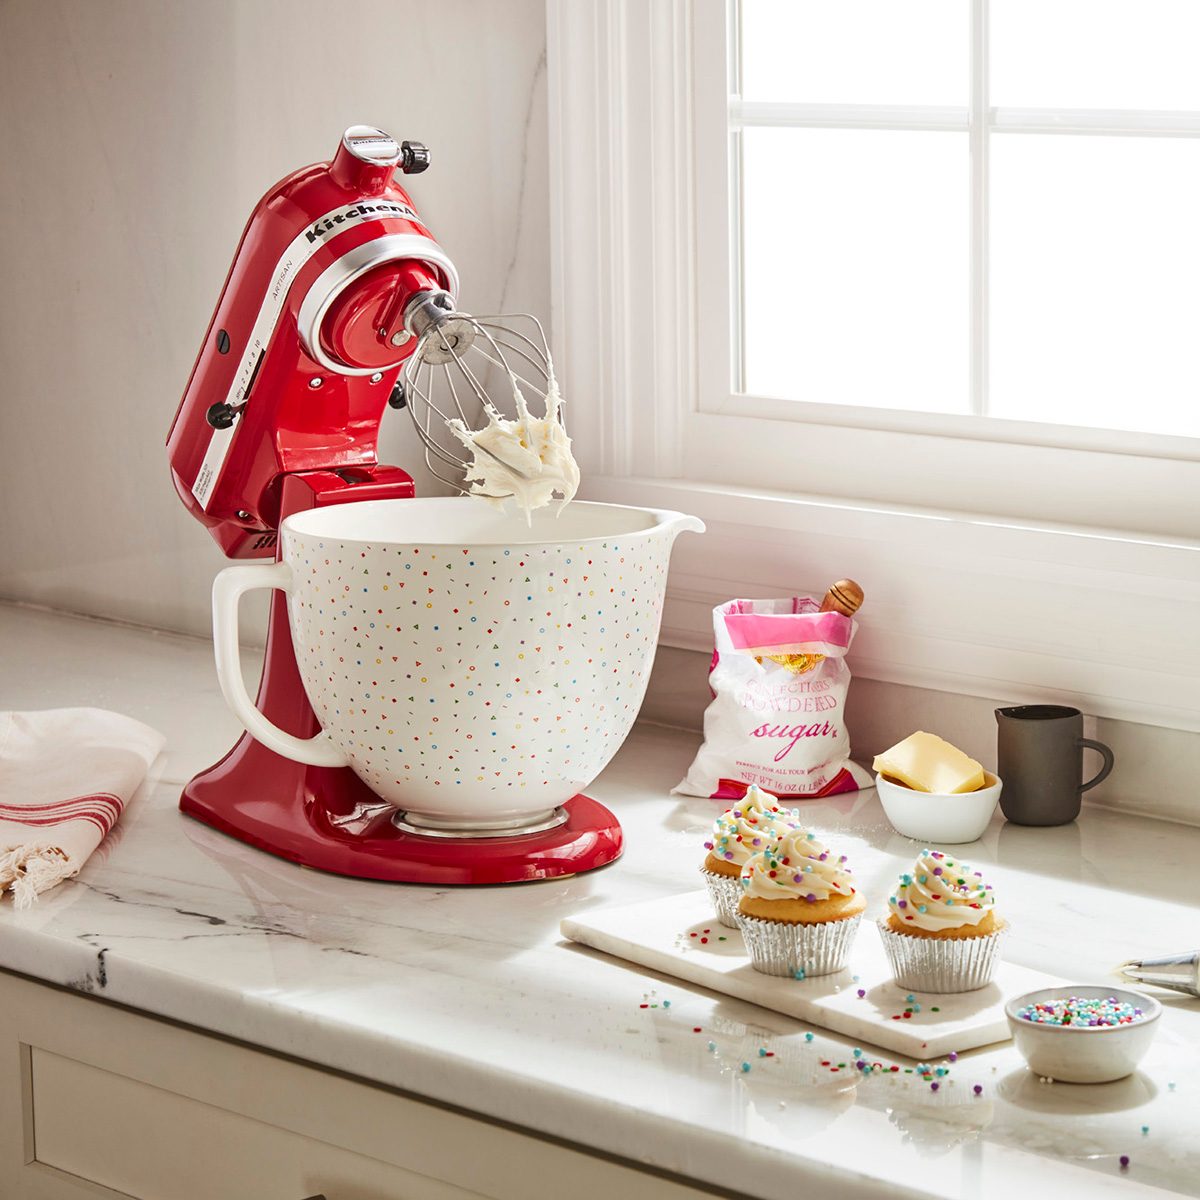 KitchenAid Created New Stand Mixer Ceramic Bowls With Fun Patterns